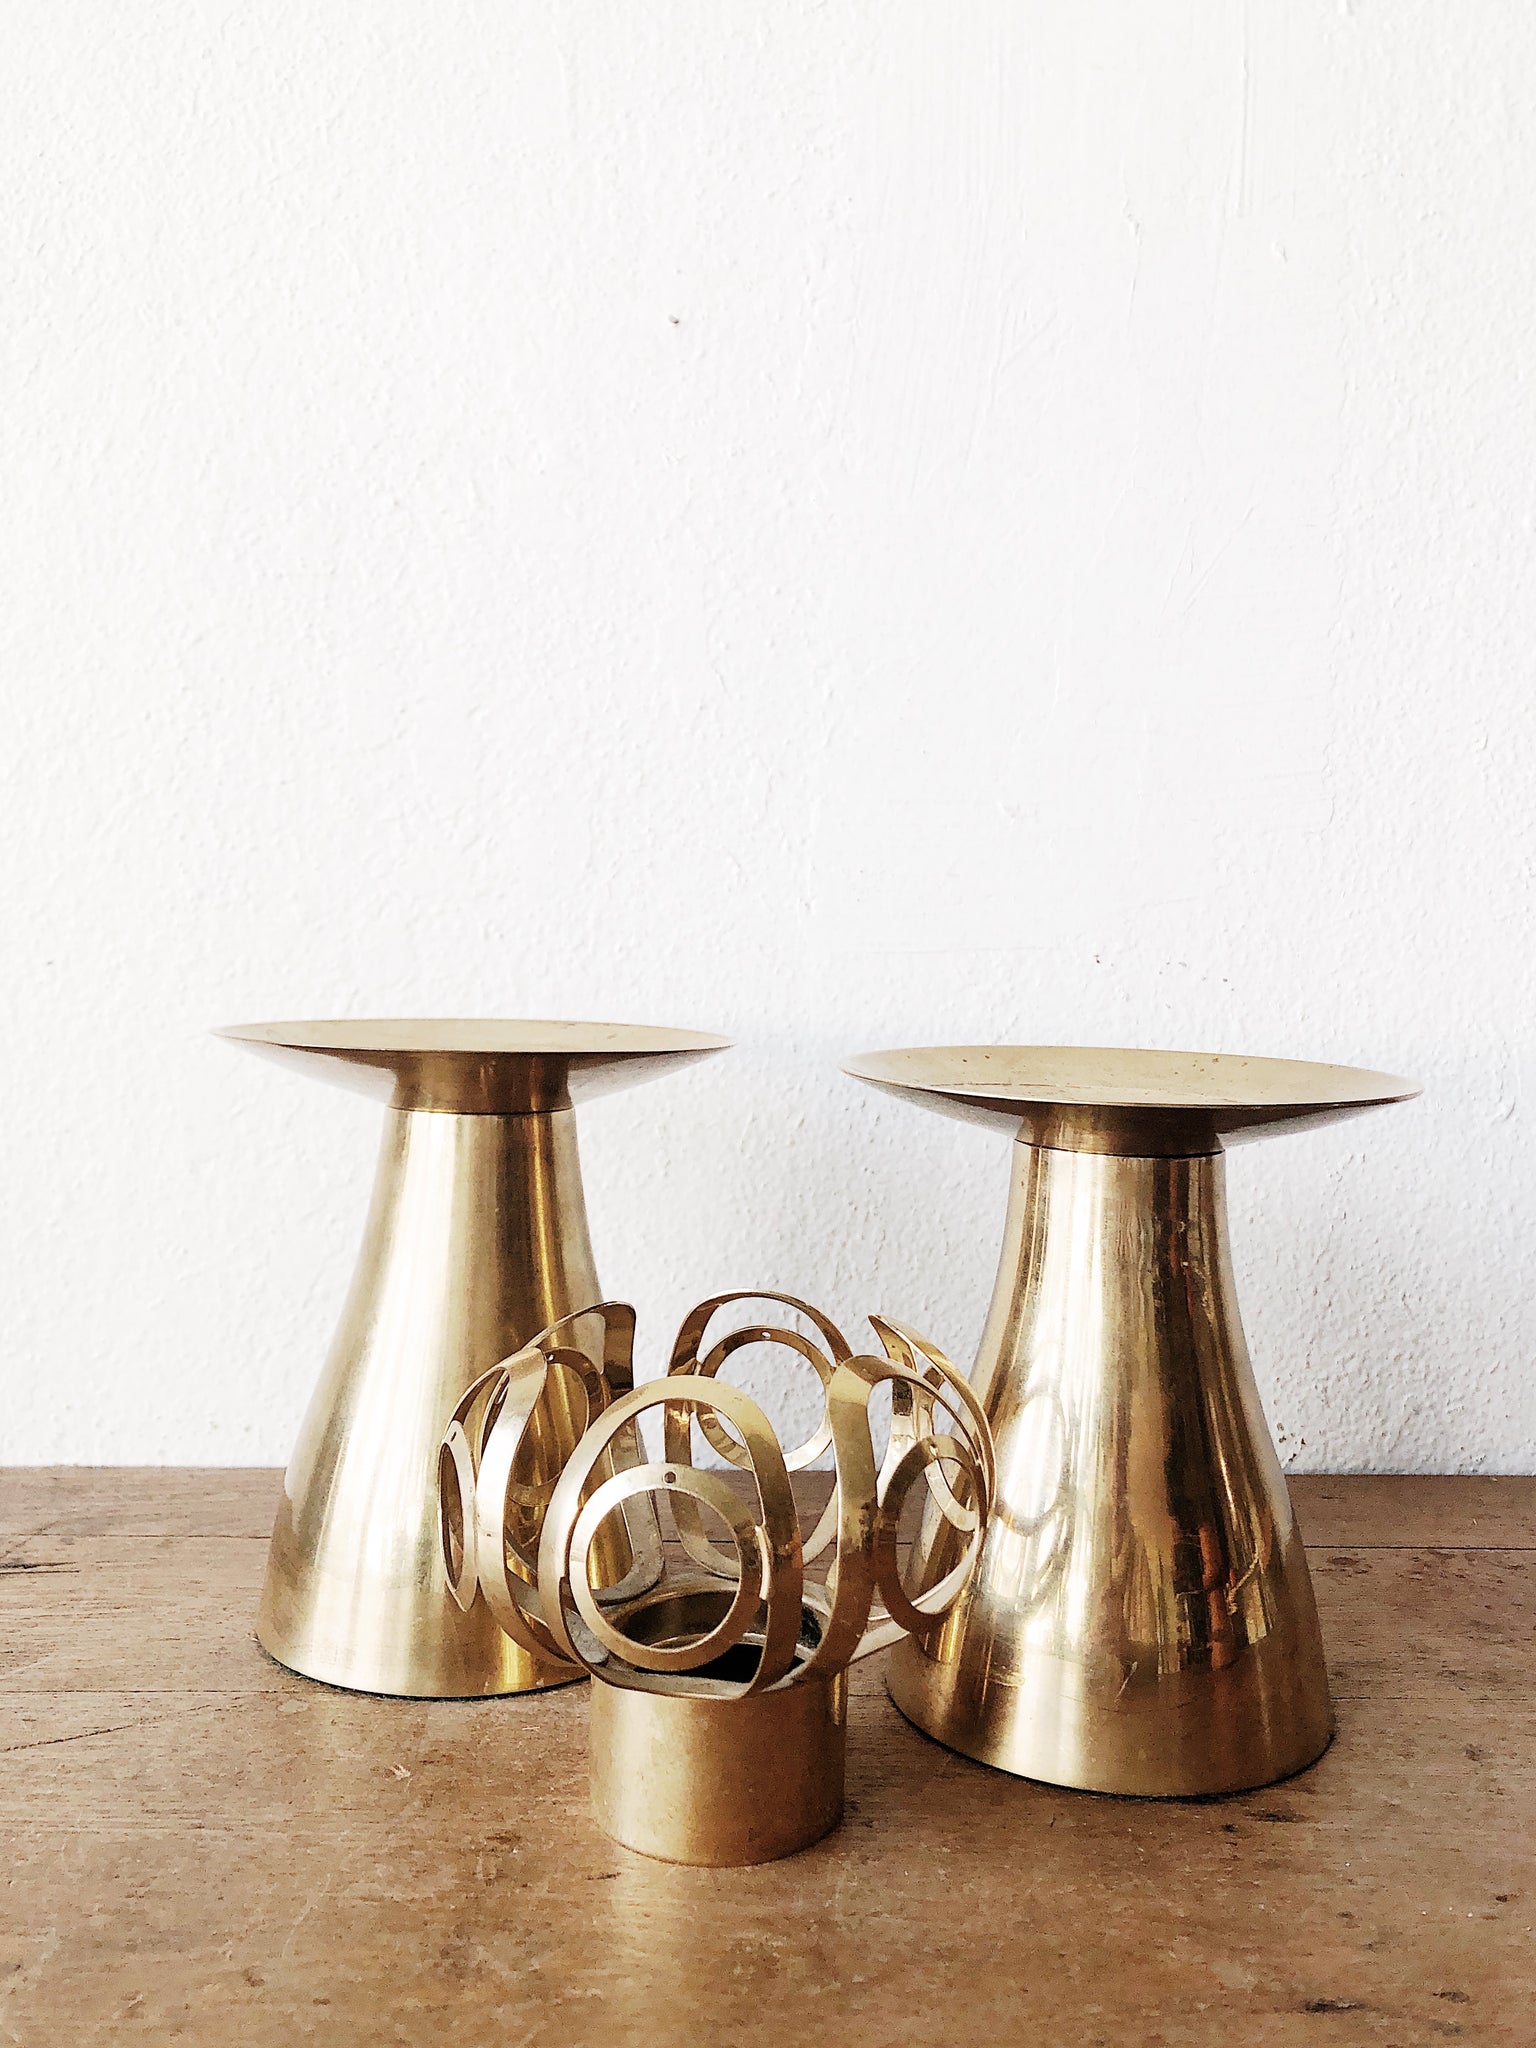 Vintage Brass Candle or Plant Stand